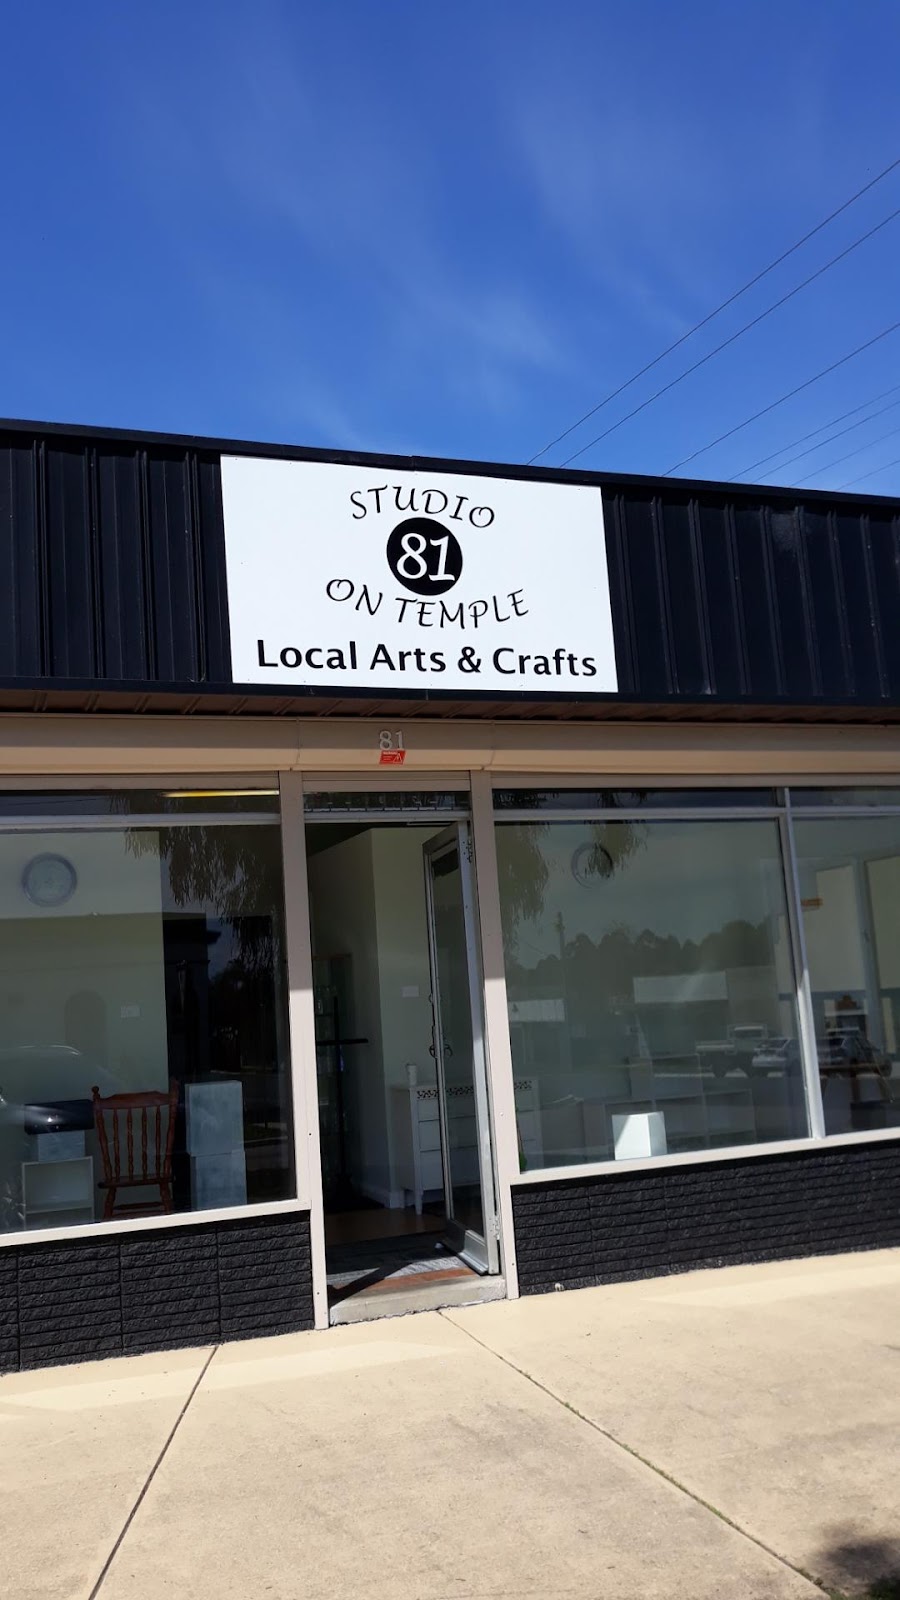 Studio 81 on Temple | store | 81 Temple St, Heyfield VIC 3858, Australia | 0412556145 OR +61 412 556 145